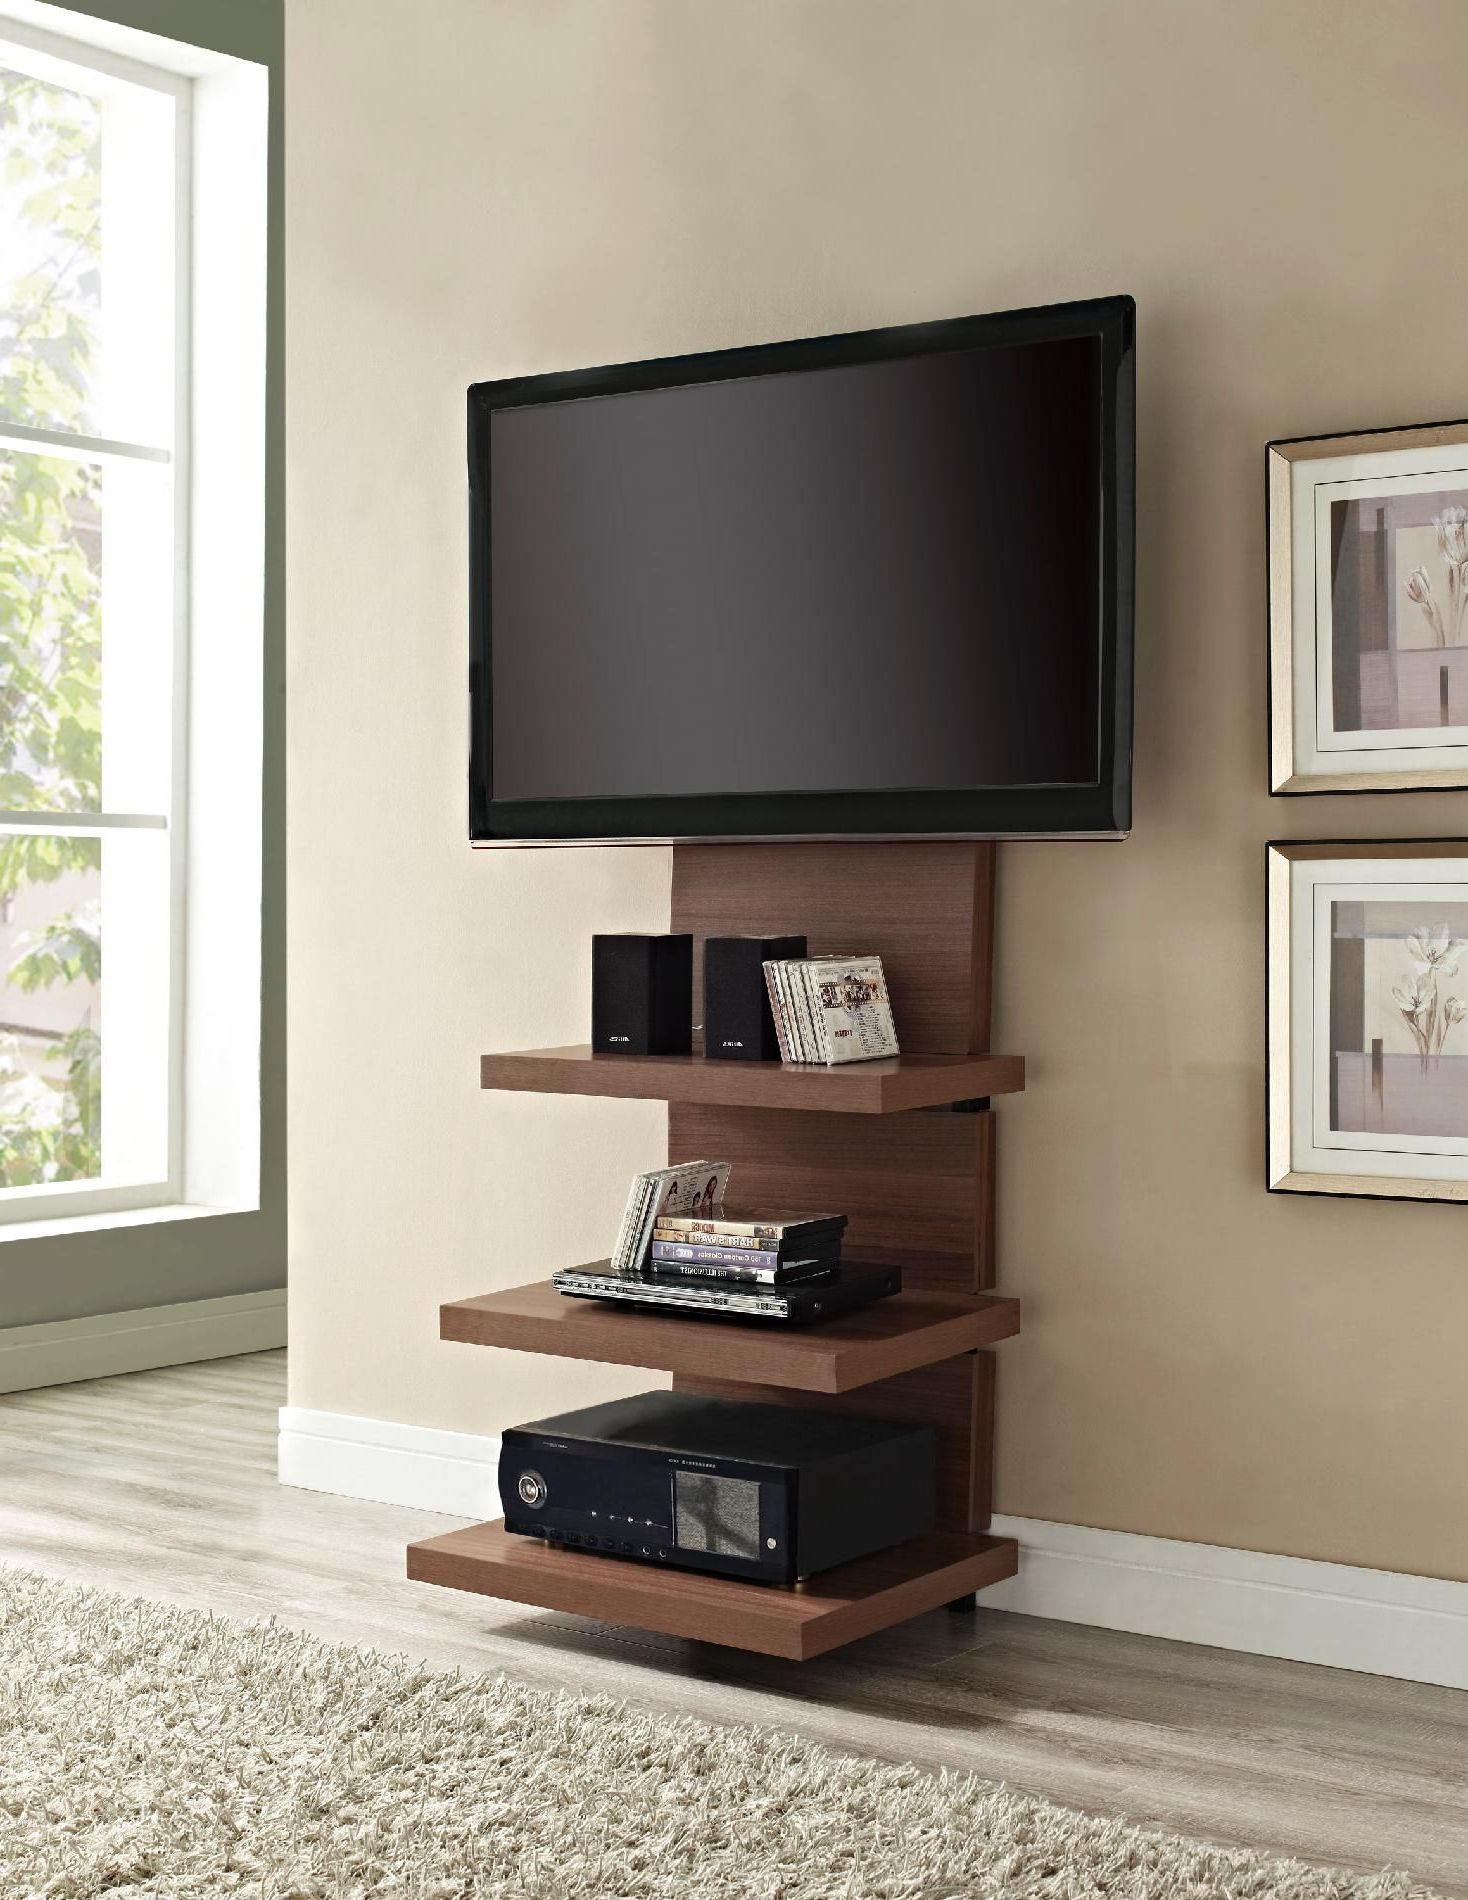 Dorel Home Furnishings Elevation Walnut Altramount Tv Stand (View 4 of 20)